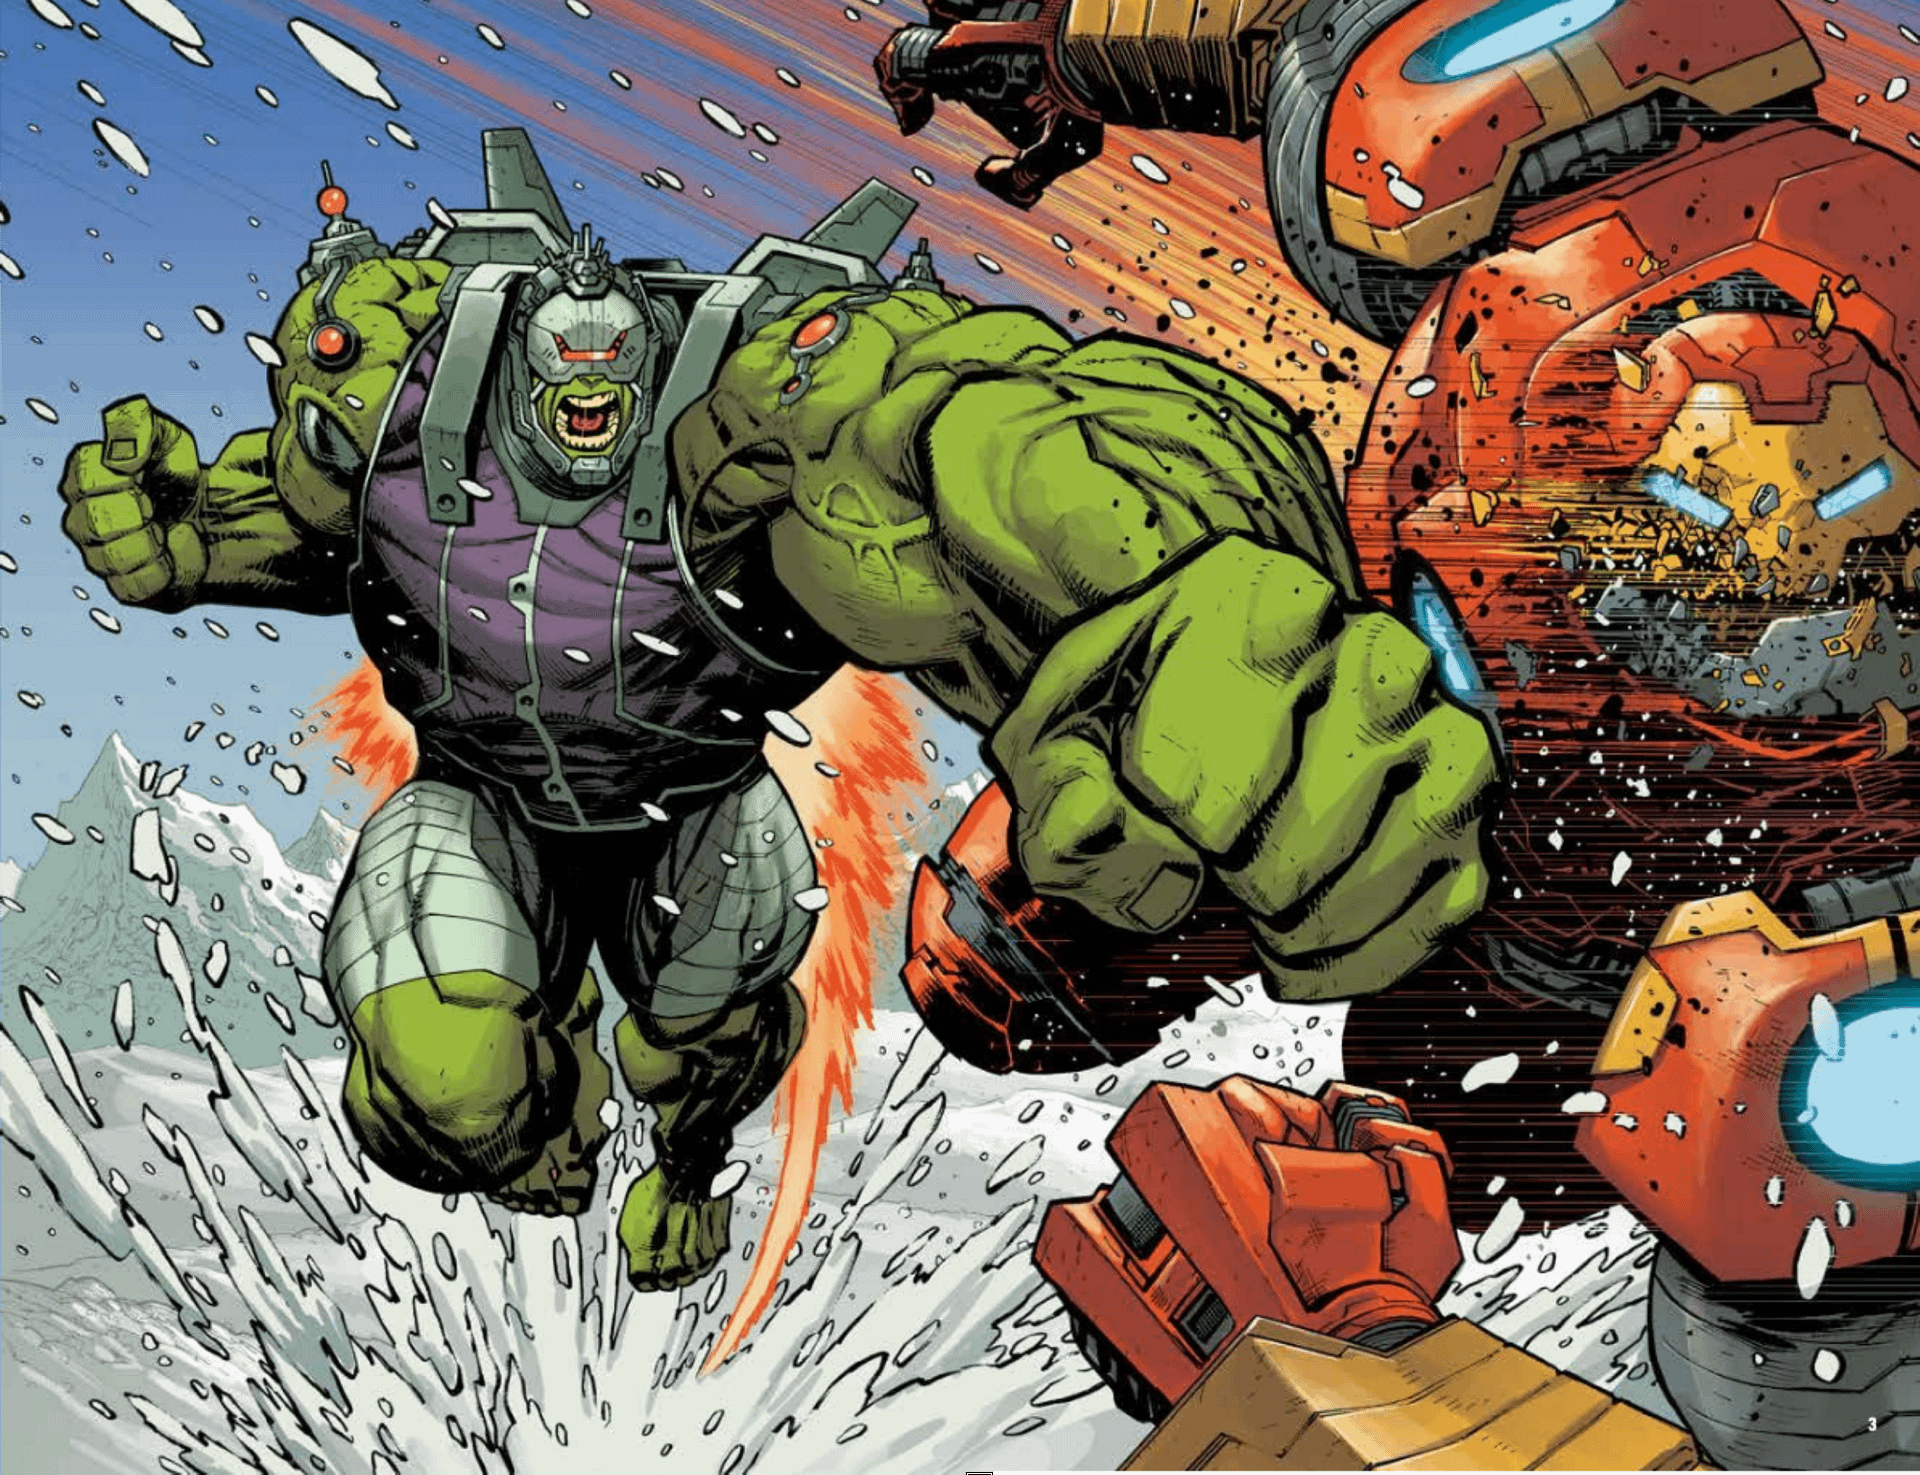 First Look: Bruce Banner Piloting Hulk #1 by Donny Cates, Ryan Ottley